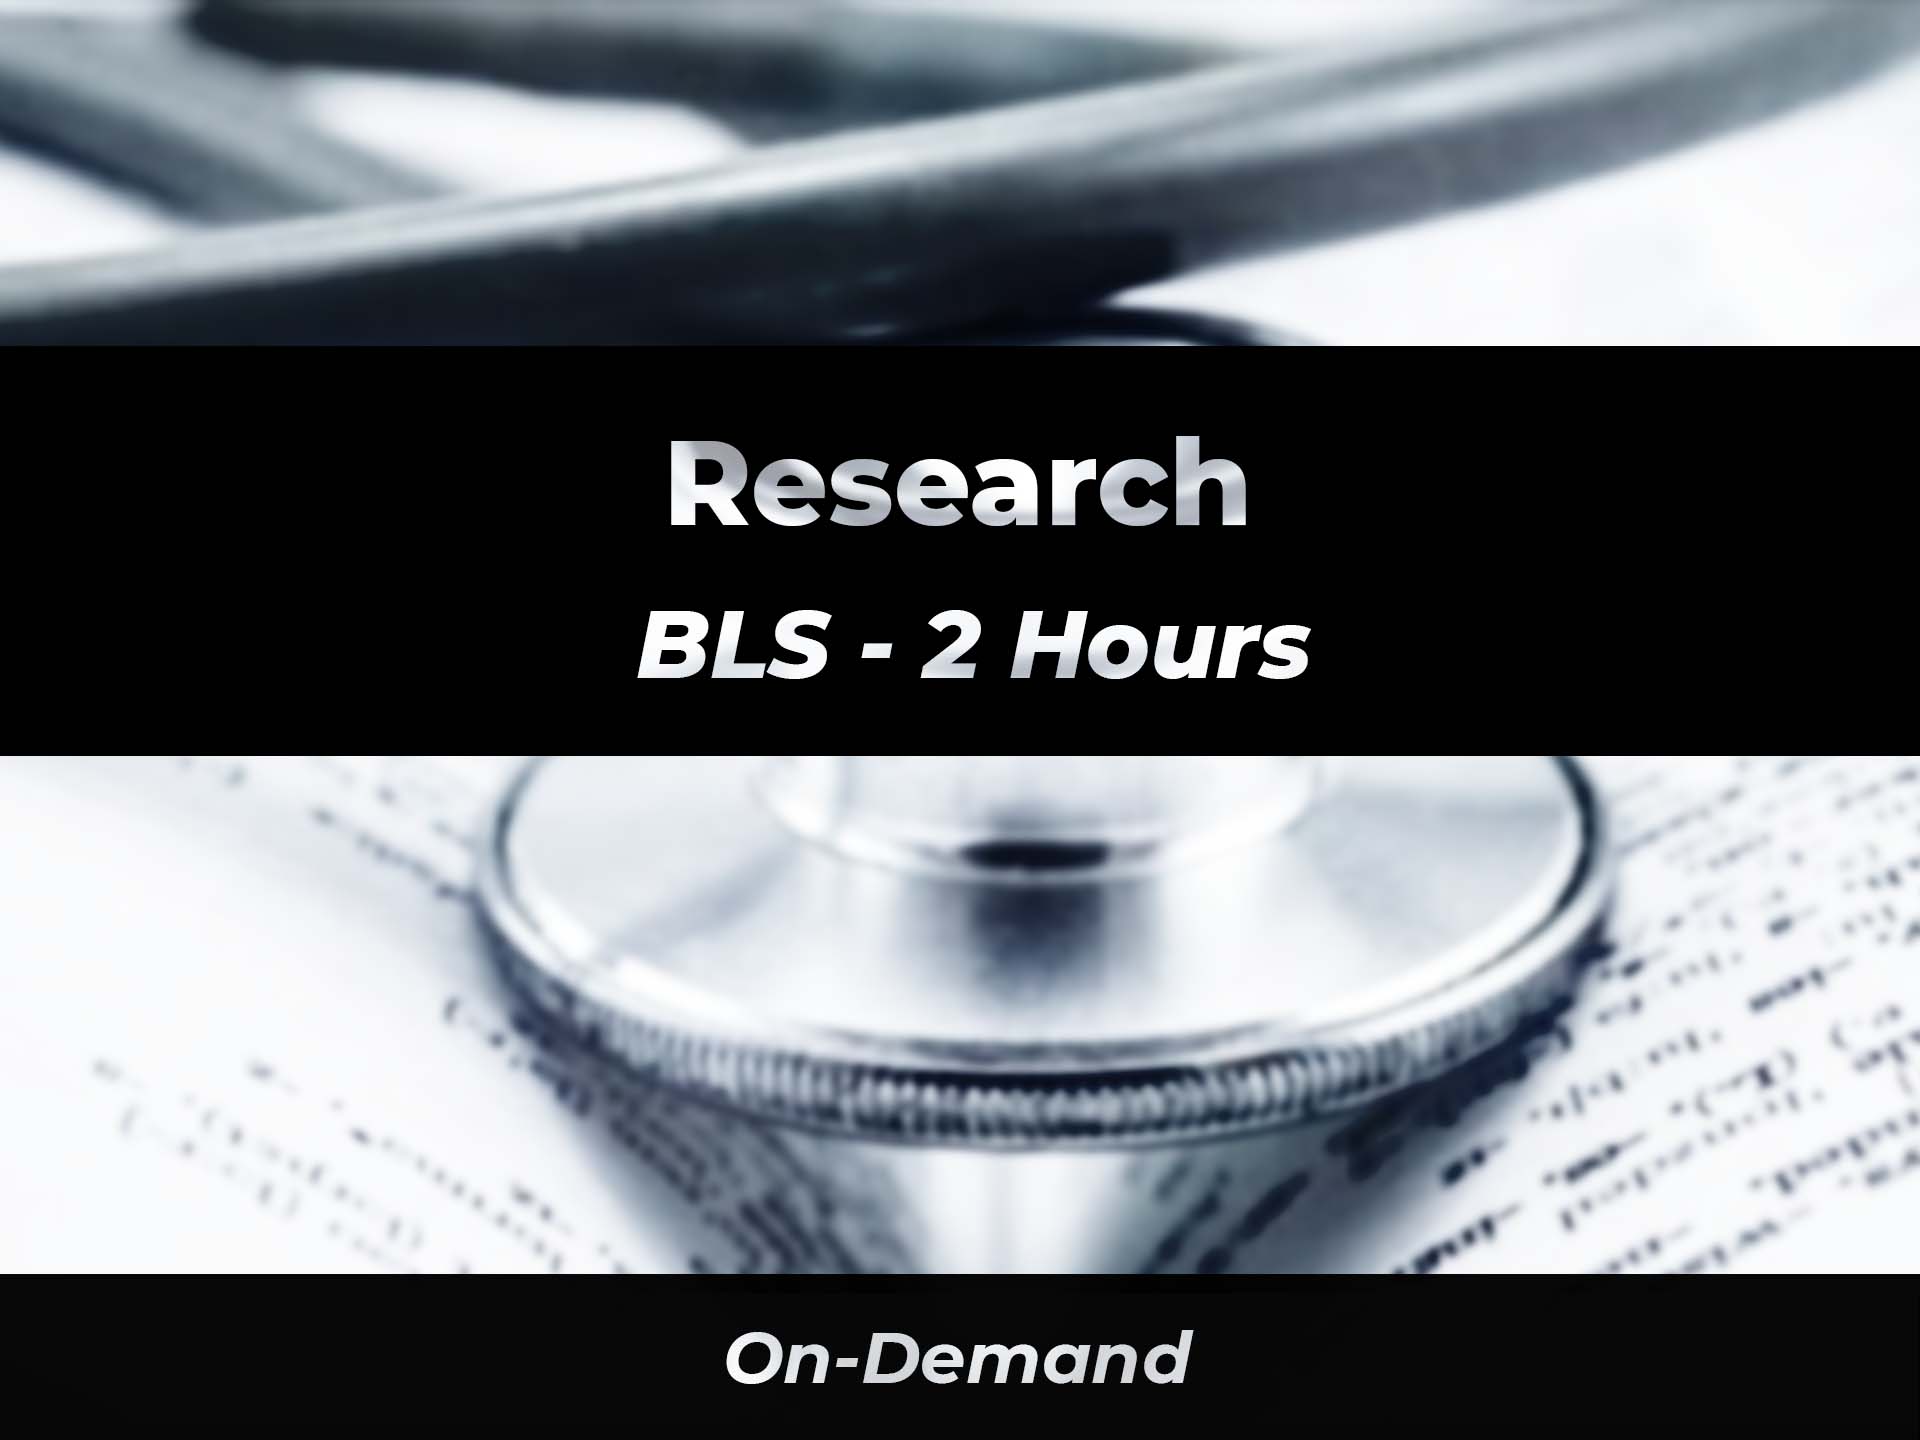 On-Demand Research BLS | 911 e-Learning Solutions LLC